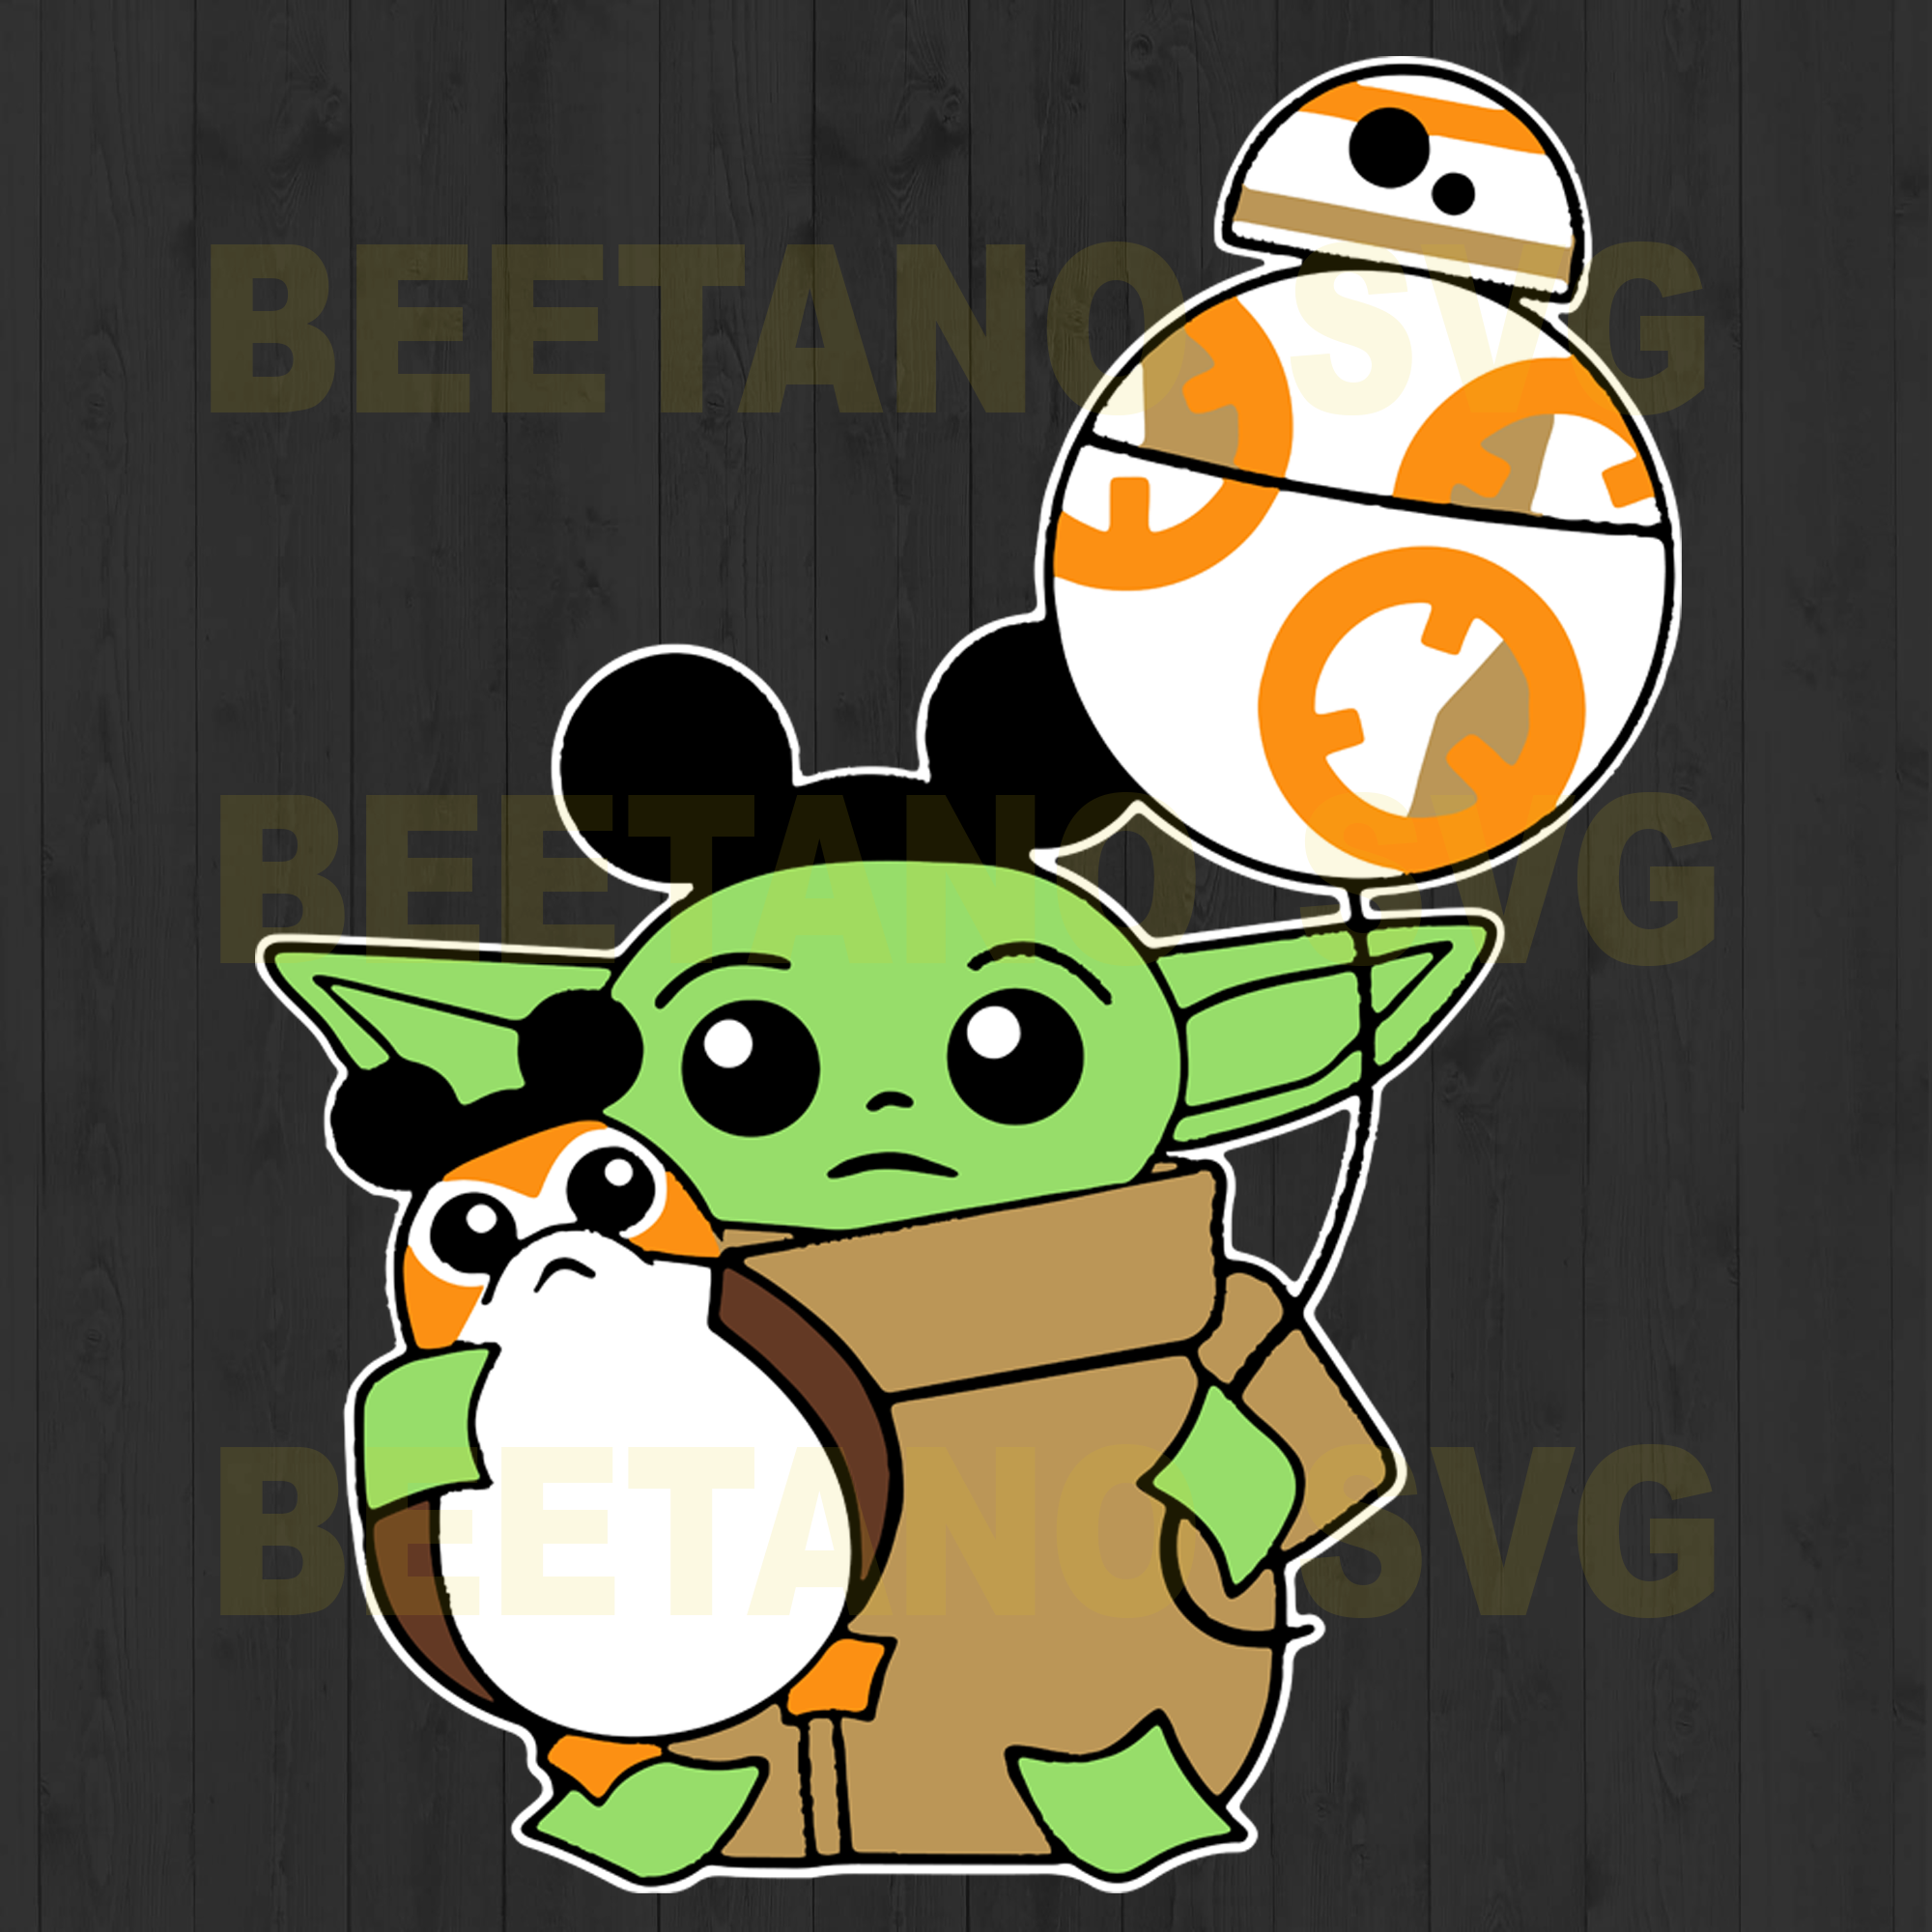 Download Baby Yoda Star War High Quality Svg Cut Files Best For Unique Craft Beetanosvg Scalable Vector Graphics SVG Cut Files